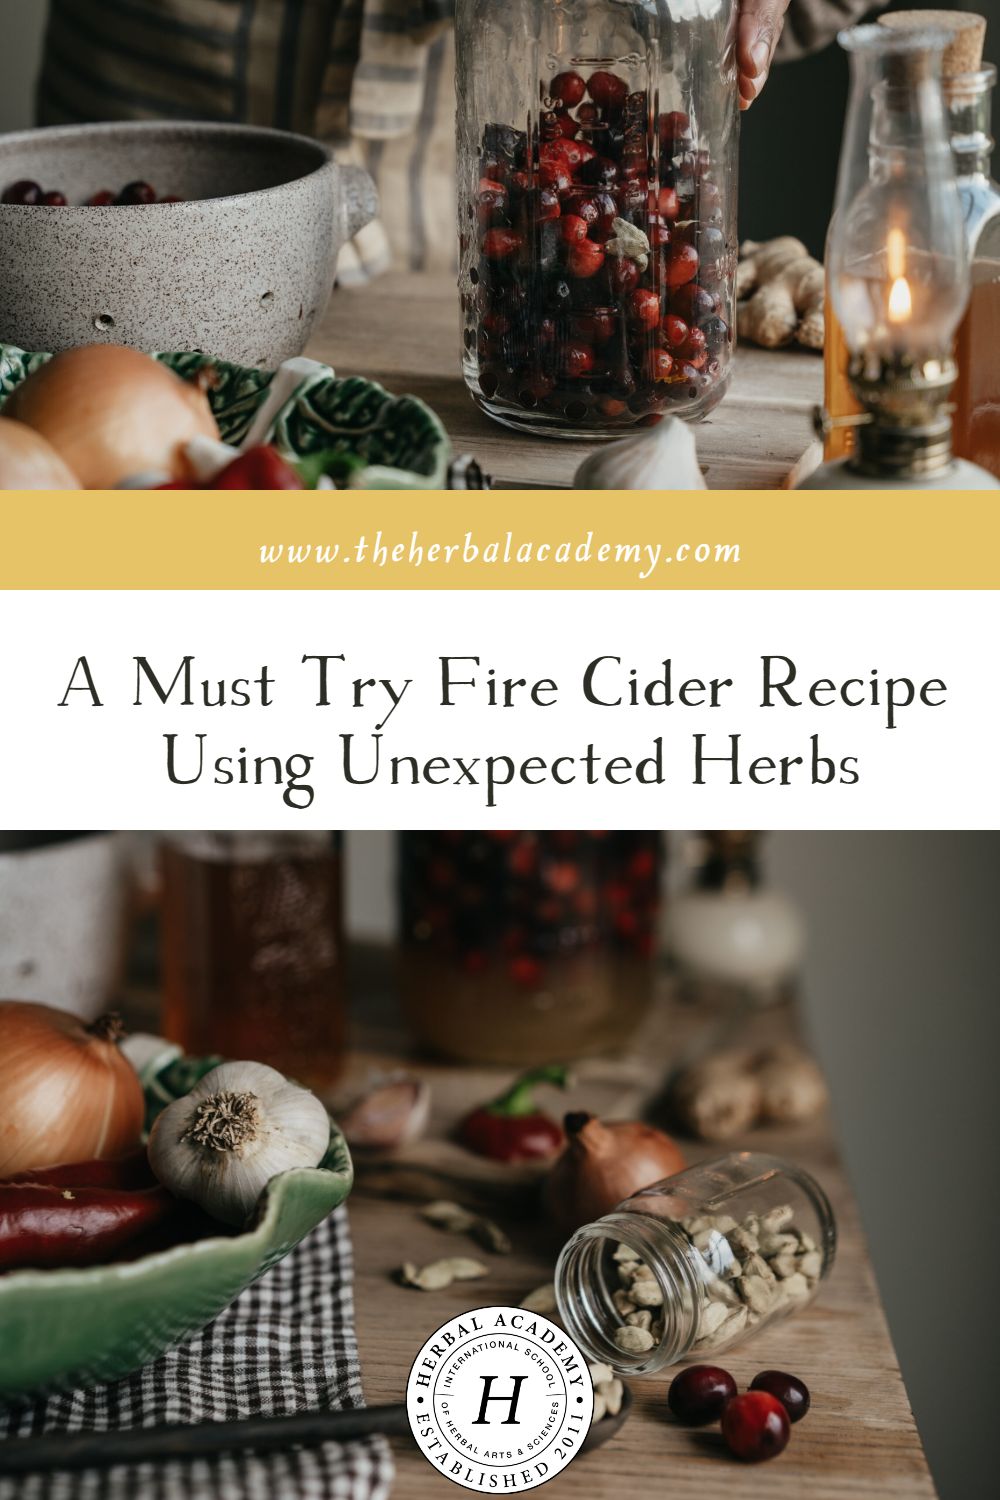 A Must Try Fire Cider Recipe Using Unexpected Herbs | Herbal Academy | In this article, we have a fun spin on the traditional fire cider with a Cranberries and Cardamom Fire Cider recipe we are sharing below!